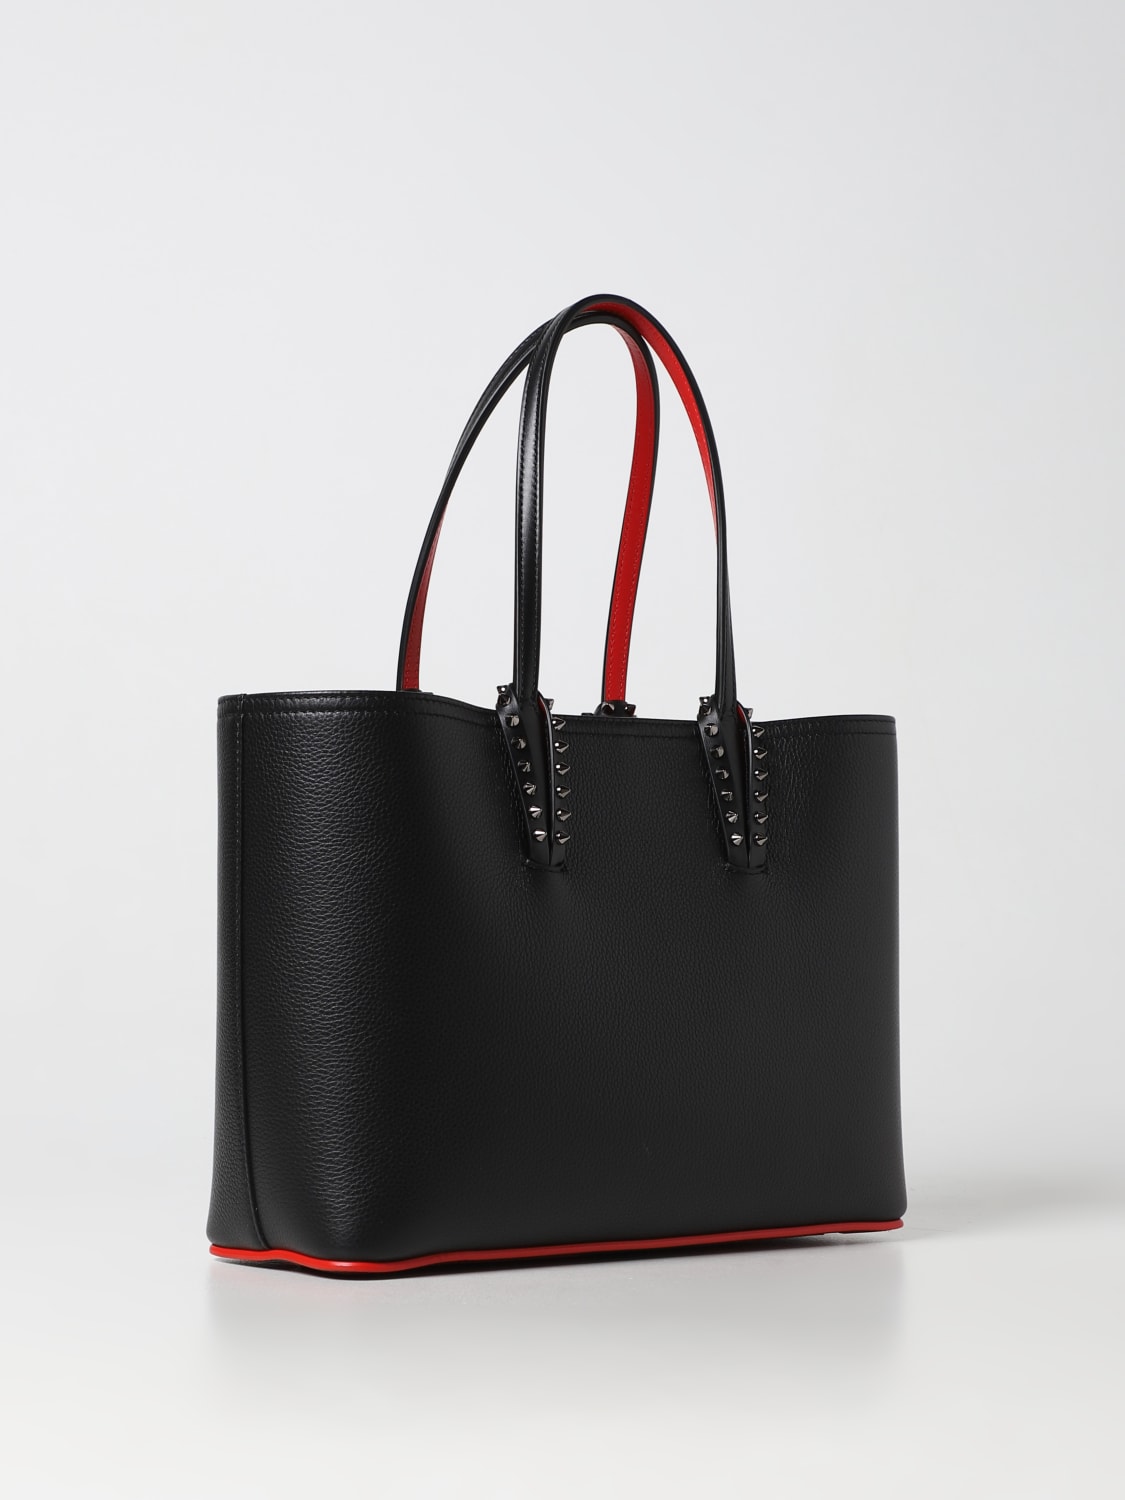 CHRISTIAN LOUBOUTIN: Cabata bag in grained leather - Black | Christian ...